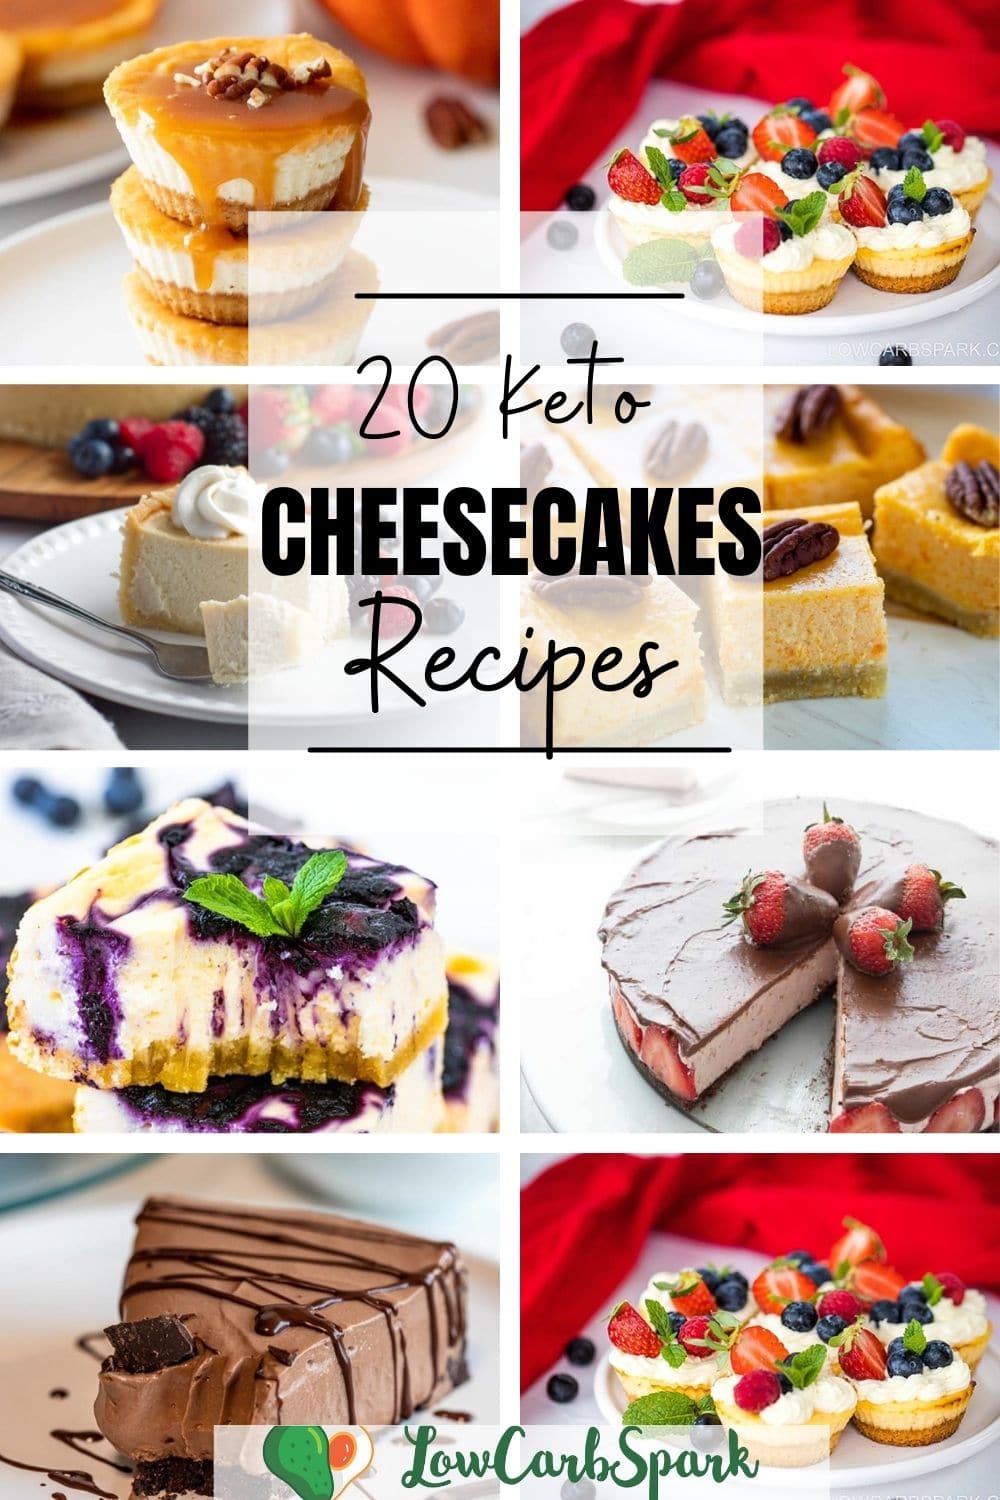 20 Keto Cheesecake Recipes - Best Low Carb Cheesecake Recipes